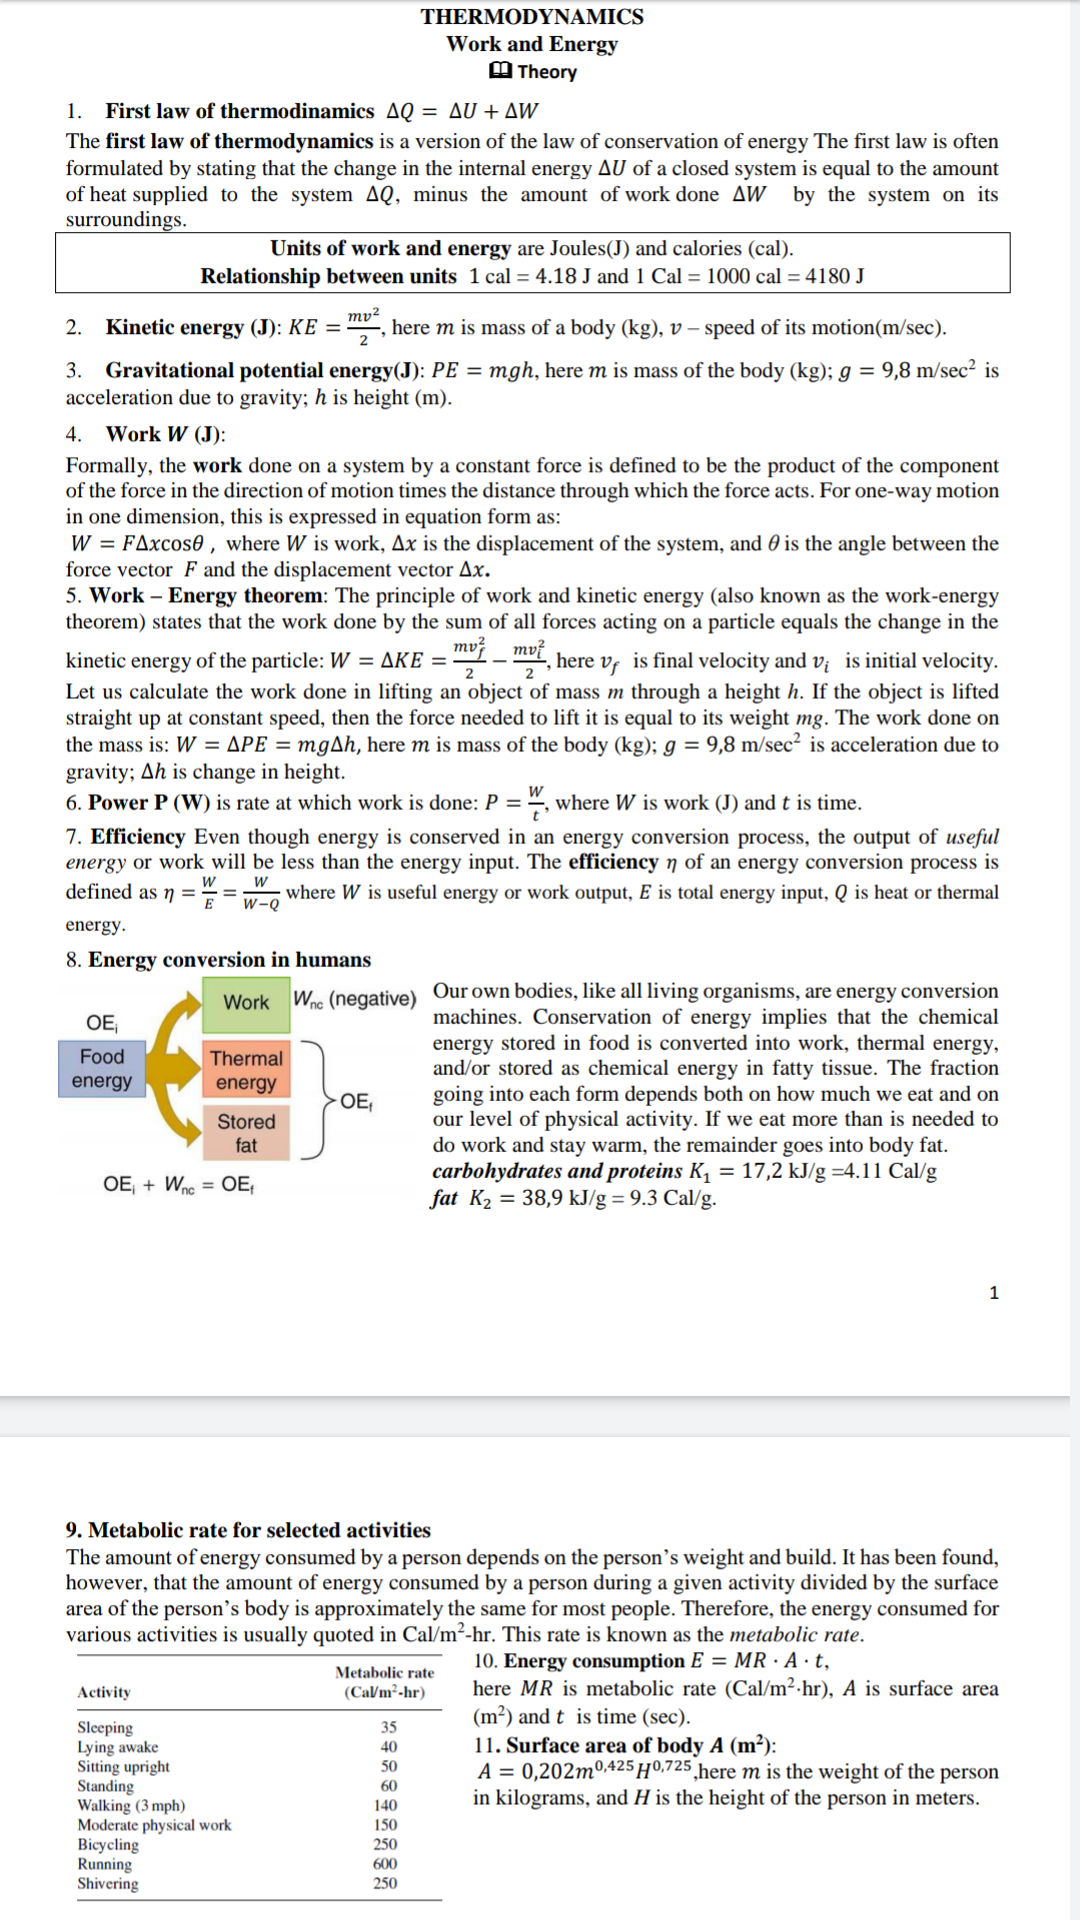 THERMODYNAMICS
Work and Energy
M Theory
1. First law of thermodinamics AQ = AU + AW
The first law of thermodynamics is a version of the law of conservation of energy The first law is often
formulated by stating that the change in the internal energy AU of a closed system is equal to the amount
of heat supplied to the system AQ, minus the amount of work done AW by the system on its
surroundings.
Units of work and energy are Joules(J) and calories (cal).
Relationship between units 1 cal = 4.18 J and 1 Cal = 1000 cal = 4180 J
ту?
here m is mass of a body (kg), v – speed of its motion(m/sec).
Kinetic energy (J): KE =
2
2.
3. Gravitational potential energy(J): PE = mgh, here m is mass of the body (kg); g = 9,8 m/sec? is
acceleration due to gravity; h is height (m).
4. Work W (J):
Formally, the work done on a system by a constant force is defined to be the product of the component
of the force in the direction of motion times the distance through which the force acts. For one-way motion
in one dimension, this is expressed in equation form as:
W = FAxcos0 , where W is work, Ax is the displacement of the system, and 0 is the angle between the
force vector F and the displacement vector Ax.
5. Work – Energy theorem: The principle of work and kinetic energy (also known as the work-energy
theorem) states that the work done by the sum of all forces acting on a particle equals the change in the
mv?
kinetic energy of the particle: W = AKE = "- , here v, is final velocity and v¡ is initial velocity.
Let us calculate the work done in lifting an object of mass m through a height h. If the object is lifted
straight up at constant speed, then the force needed to lift it is equal to its weight mg. The work done on
the mass is: W = APE = mgAh, here m is mass of the body (kg); g = 9,8 m/sec² is acceleration due to
gravity; Ah is change in height.
6. Power P (W) is rate at which work is done: P = ", where W is work (J) and t is time.
7. Efficiency Even though energy is conserved in an energy conversion process, the output of useful
energy or work will be less than the energy input. The efficiency 7 of an energy conversion process
defined as ŋ =
is
where W is useful energy or work output, E is total energy input, Q is heat or thermal
w-Q
energy.
8. Energy conversion in humans
Our own bodies, like all living organisms, are energy conversion
machines. Conservation of energy implies that the chemical
energy stored in food is converted into work, thermal energy,
and/or stored as chemical energy in fatty tissue. The fraction
going into each form depends both on how much we eat and on
our level of physical activity. If we eat more than is needed to
do work and stay warm, the remainder goes into body fat.
carbohydrates and proteins K, = 17,2 kJ/g =4.11 Cal/g
fat K2 = 38,9 kJ/g = 9.3 Cal/g.
Wne (negative)
Work
OE,
Food
Thermal
energy
energy
OE,
Stored
fat
OE + Wne = OE,
9. Metabolic rate for selected activities
The amount of energy consumed by a person depends on the person's weight and build. It has been found,
however, that the amount of energy consumed by a person during a given activity divided by the surface
area of the person's body is approximately the same for most people. Therefore, the energy consumed for
various activities is usually quoted in Cal/m²-hr. This rate is known as the metabolic rate.
10. Energy consumption E = MR · A · t,
here MR is metabolic rate (Cal/m²·hr), A is surface area
(m²) and t is time (sec).
11. Surface area of body A (m²):
A = 0,202m0425 H0,725 ,here m is the weight of the person
in kilograms, and H is the height of the person in meters.
Metabolic rate
(Ca/m²-hr)
Activity
Sleeping
Lying awake
Sitting upright
Standing
Walking (3 mph)
Moderate physical work
Bicycling
Running
Shivering
35
40
50
60
140
150
250
600
250
